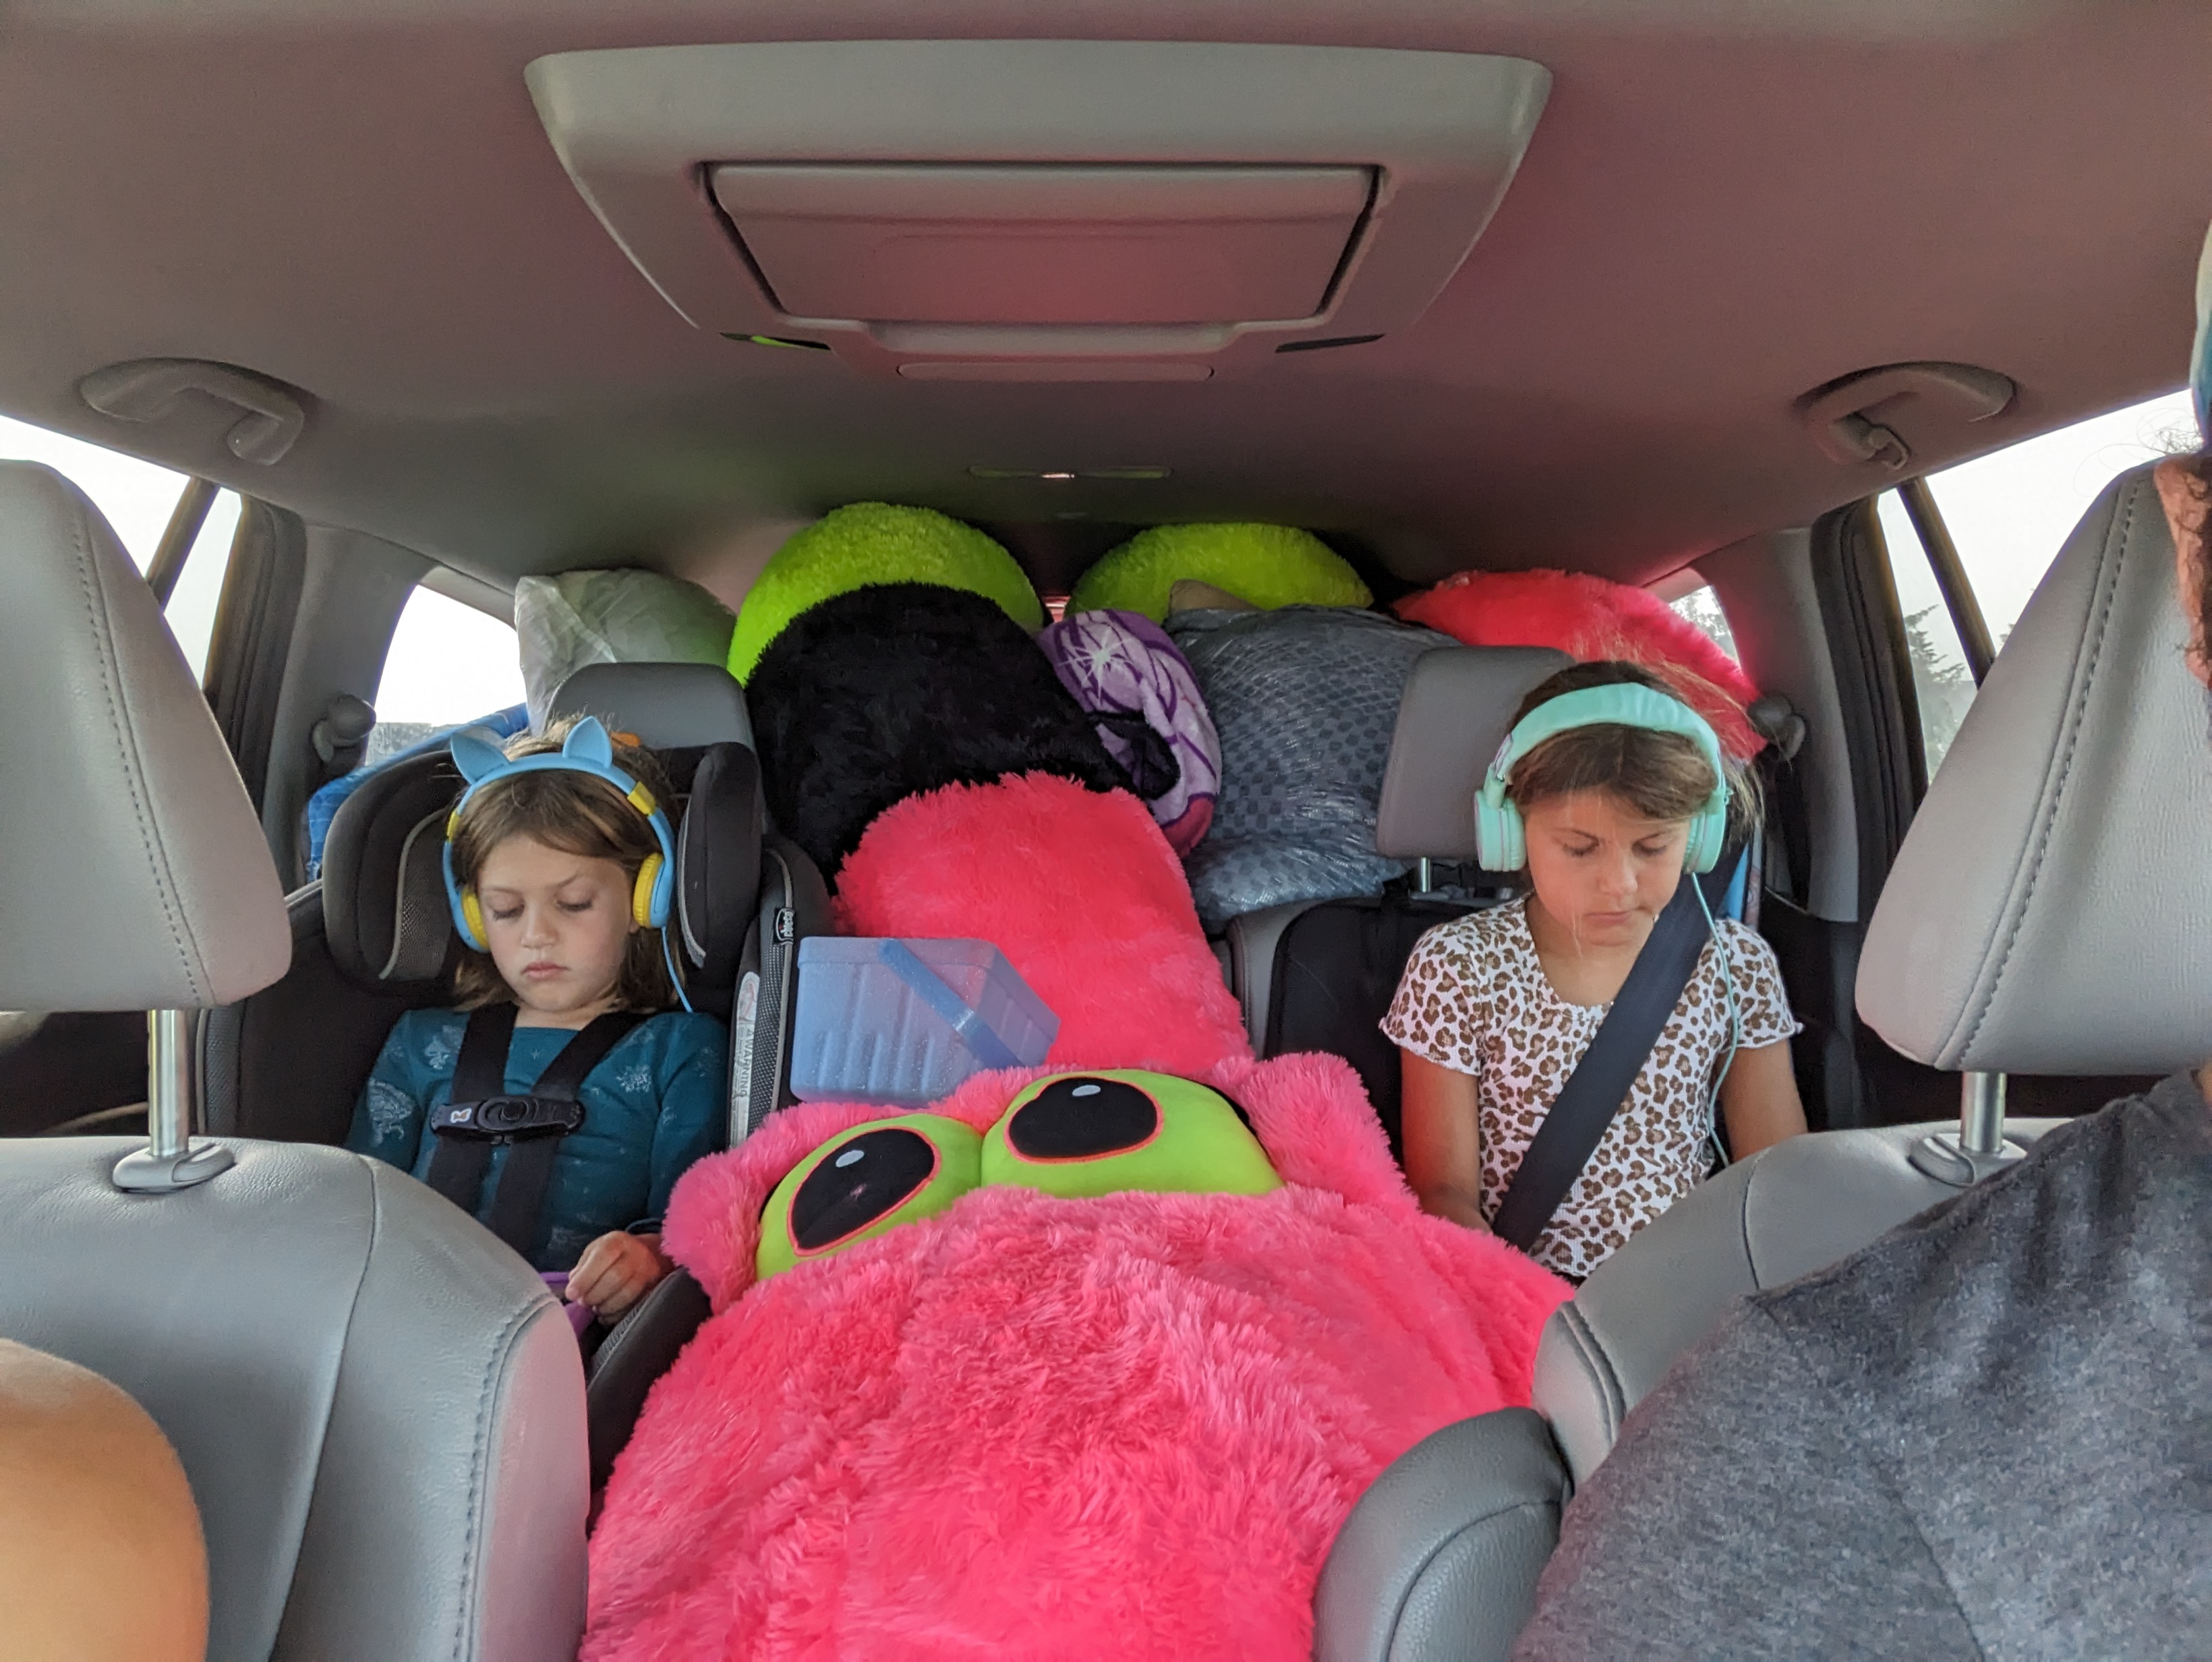 Photo taken from the front seat of a car looking back; two girls are wearing head phones and looking down at ipads. In between is a giant pink stuffed snake with bright yellow eyes.